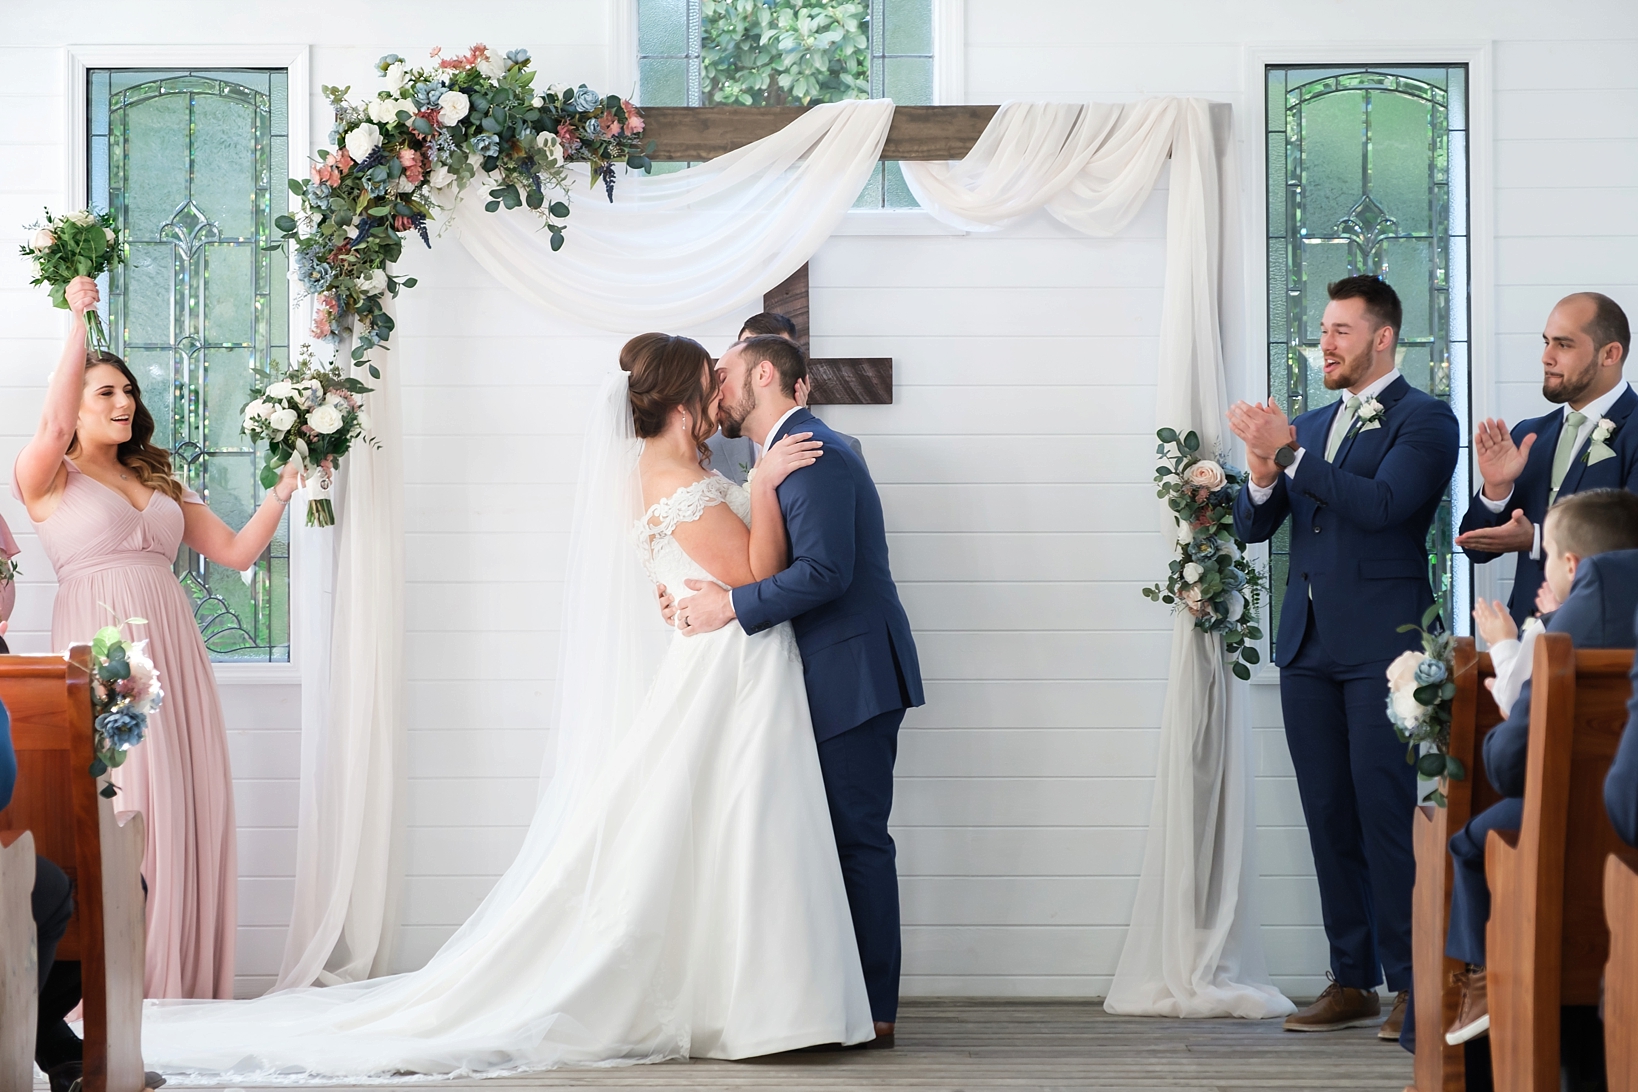 Bride and Groom kiss for the first time as Man and Wife